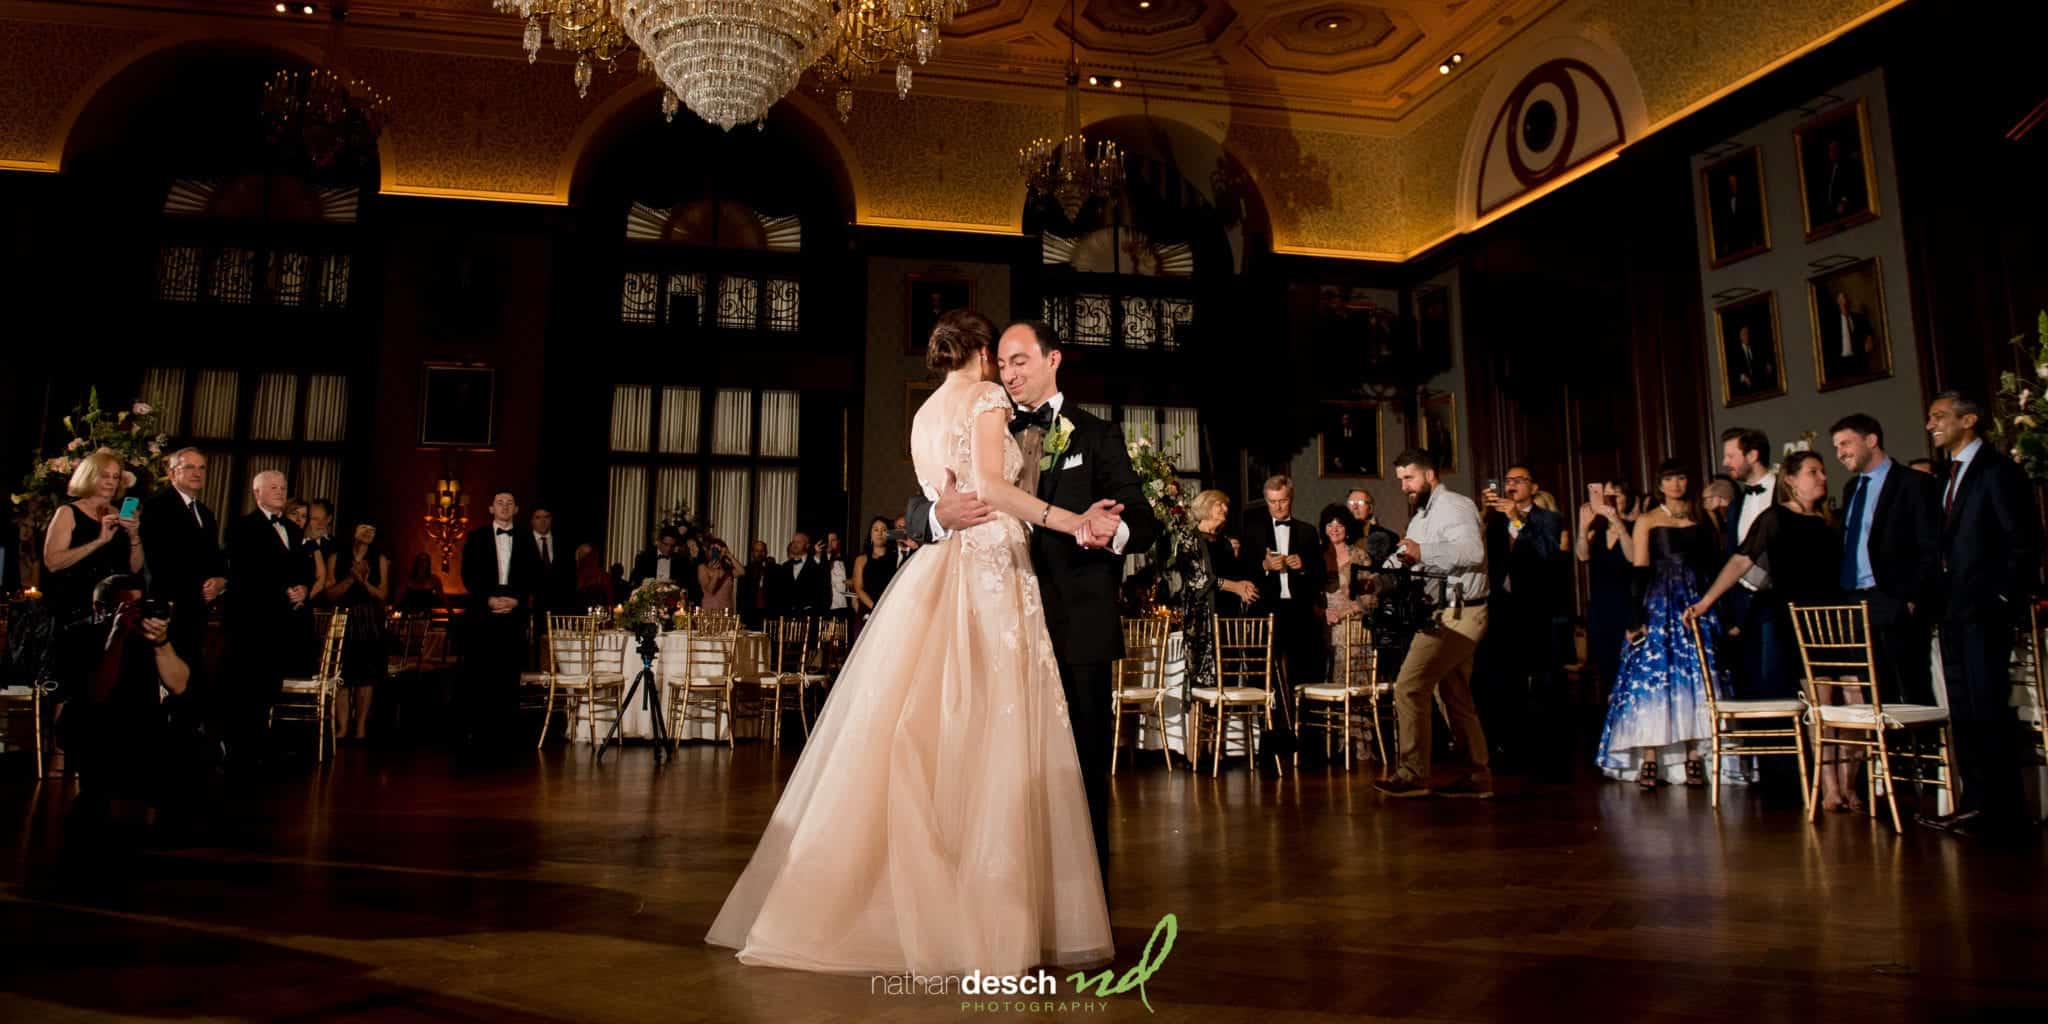 Wedding Pictures from The Union League